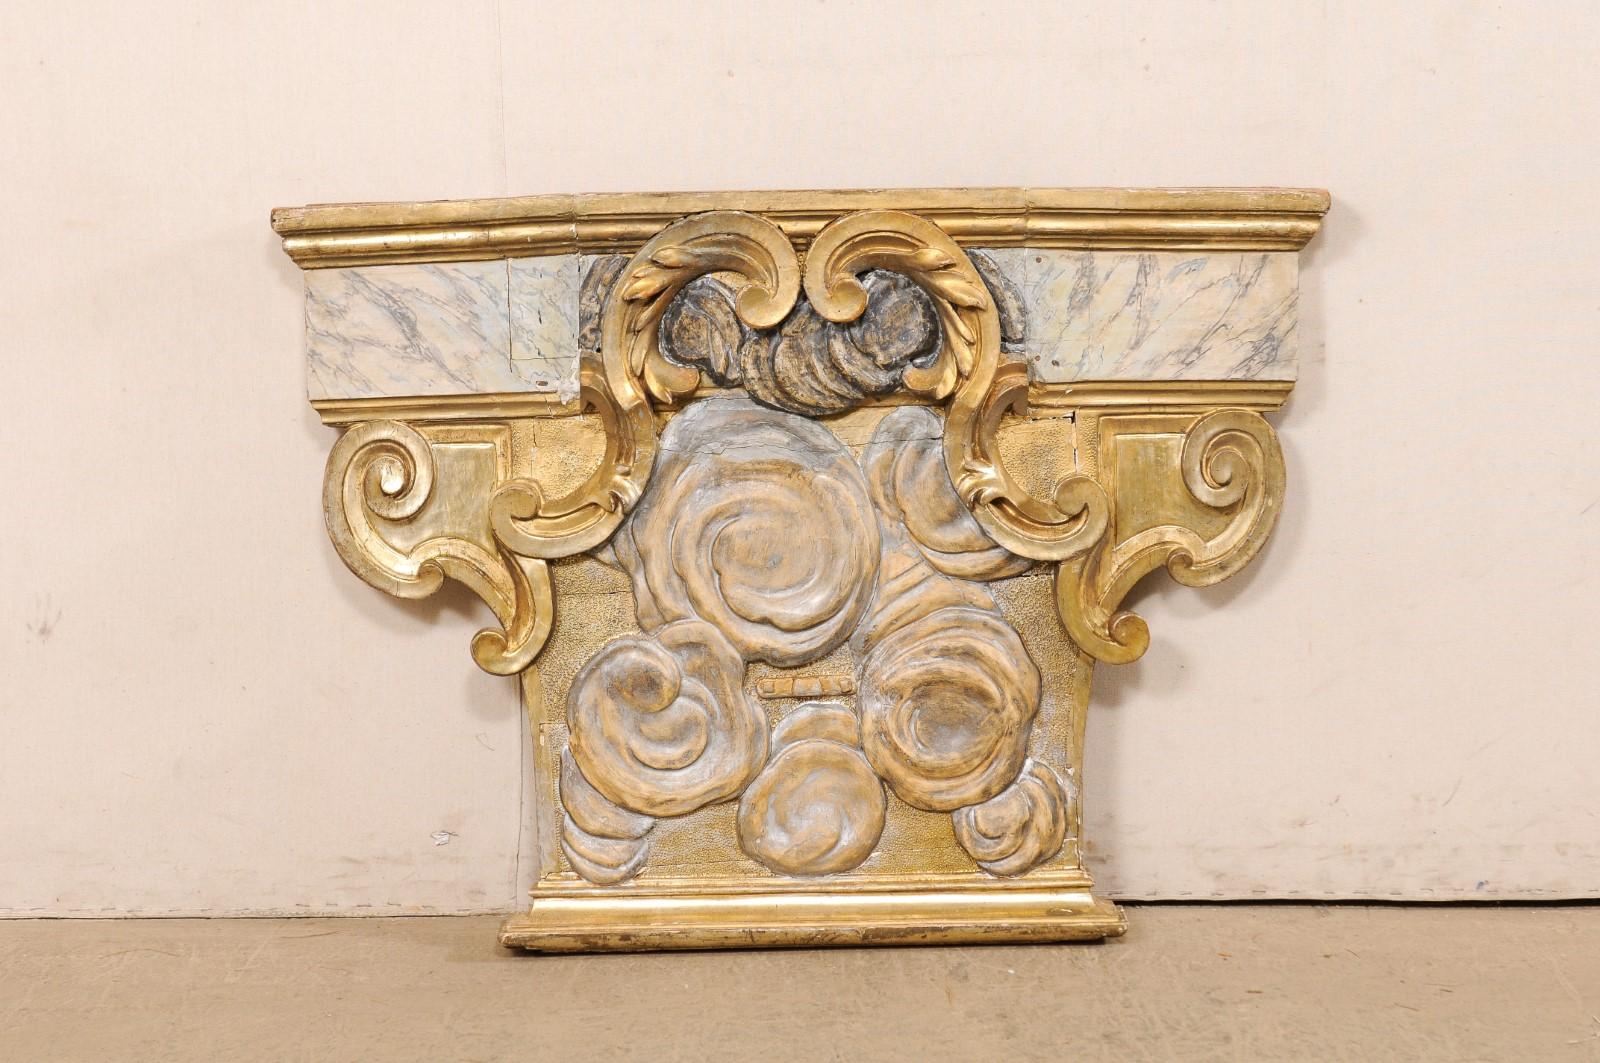 An Italian carved and gilt wood wall plaque from the 18th century. This antique wall ornament from Italy is a nicely sized piece at roughly four feet in width and just shy of three feet tall. It has a thick T-shaped figure adorn with carved roses,